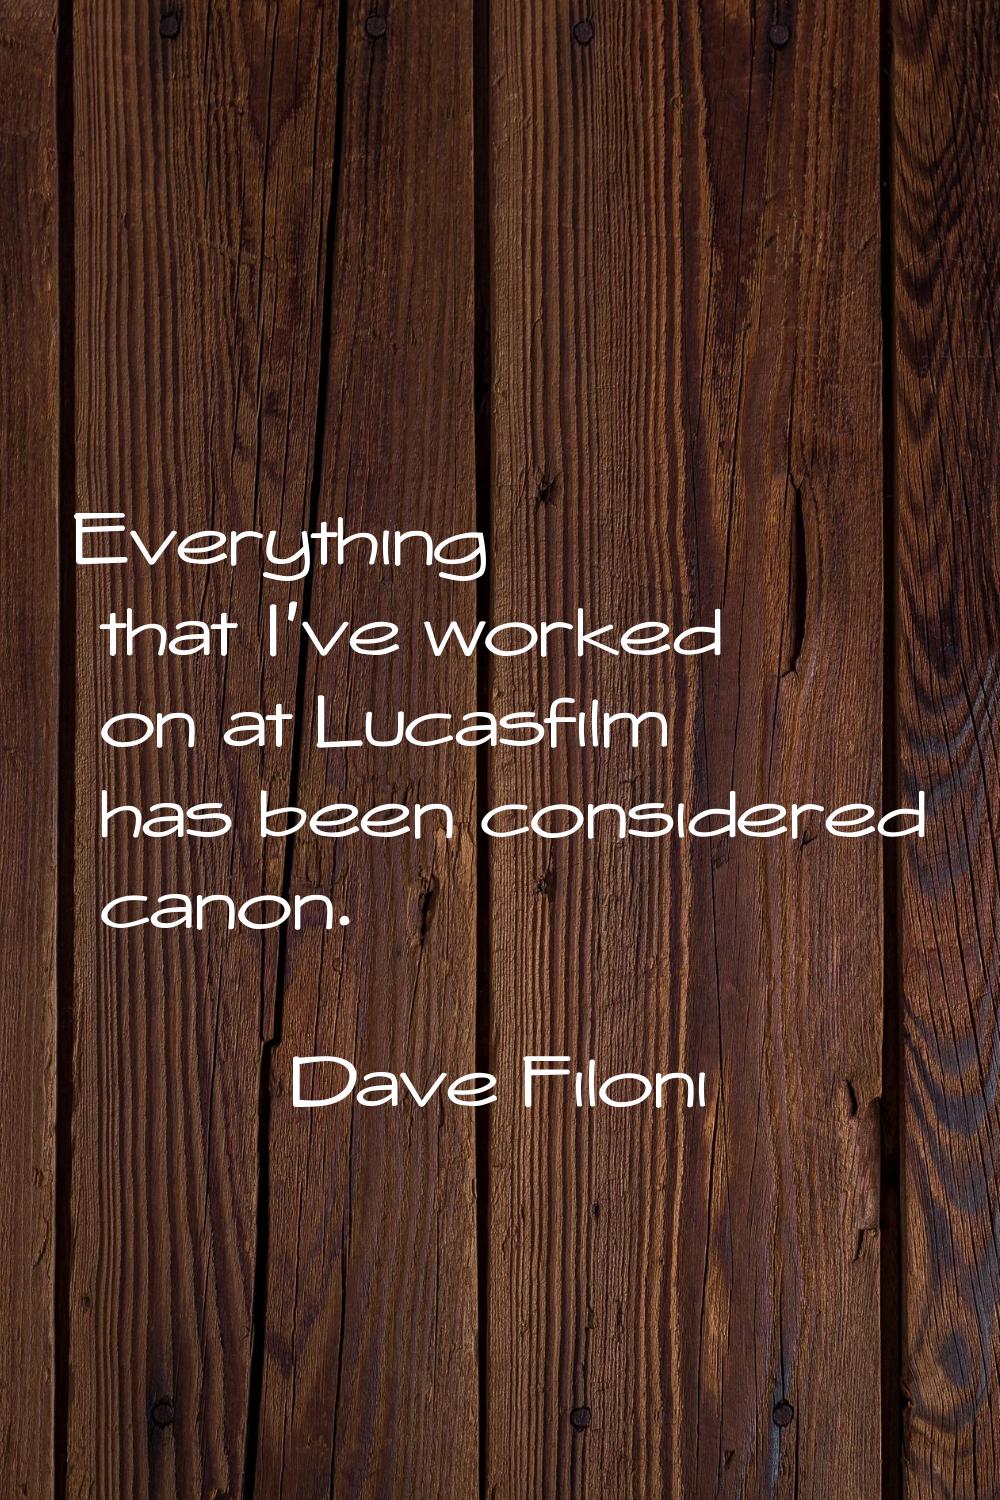 Everything that I've worked on at Lucasfilm has been considered canon.